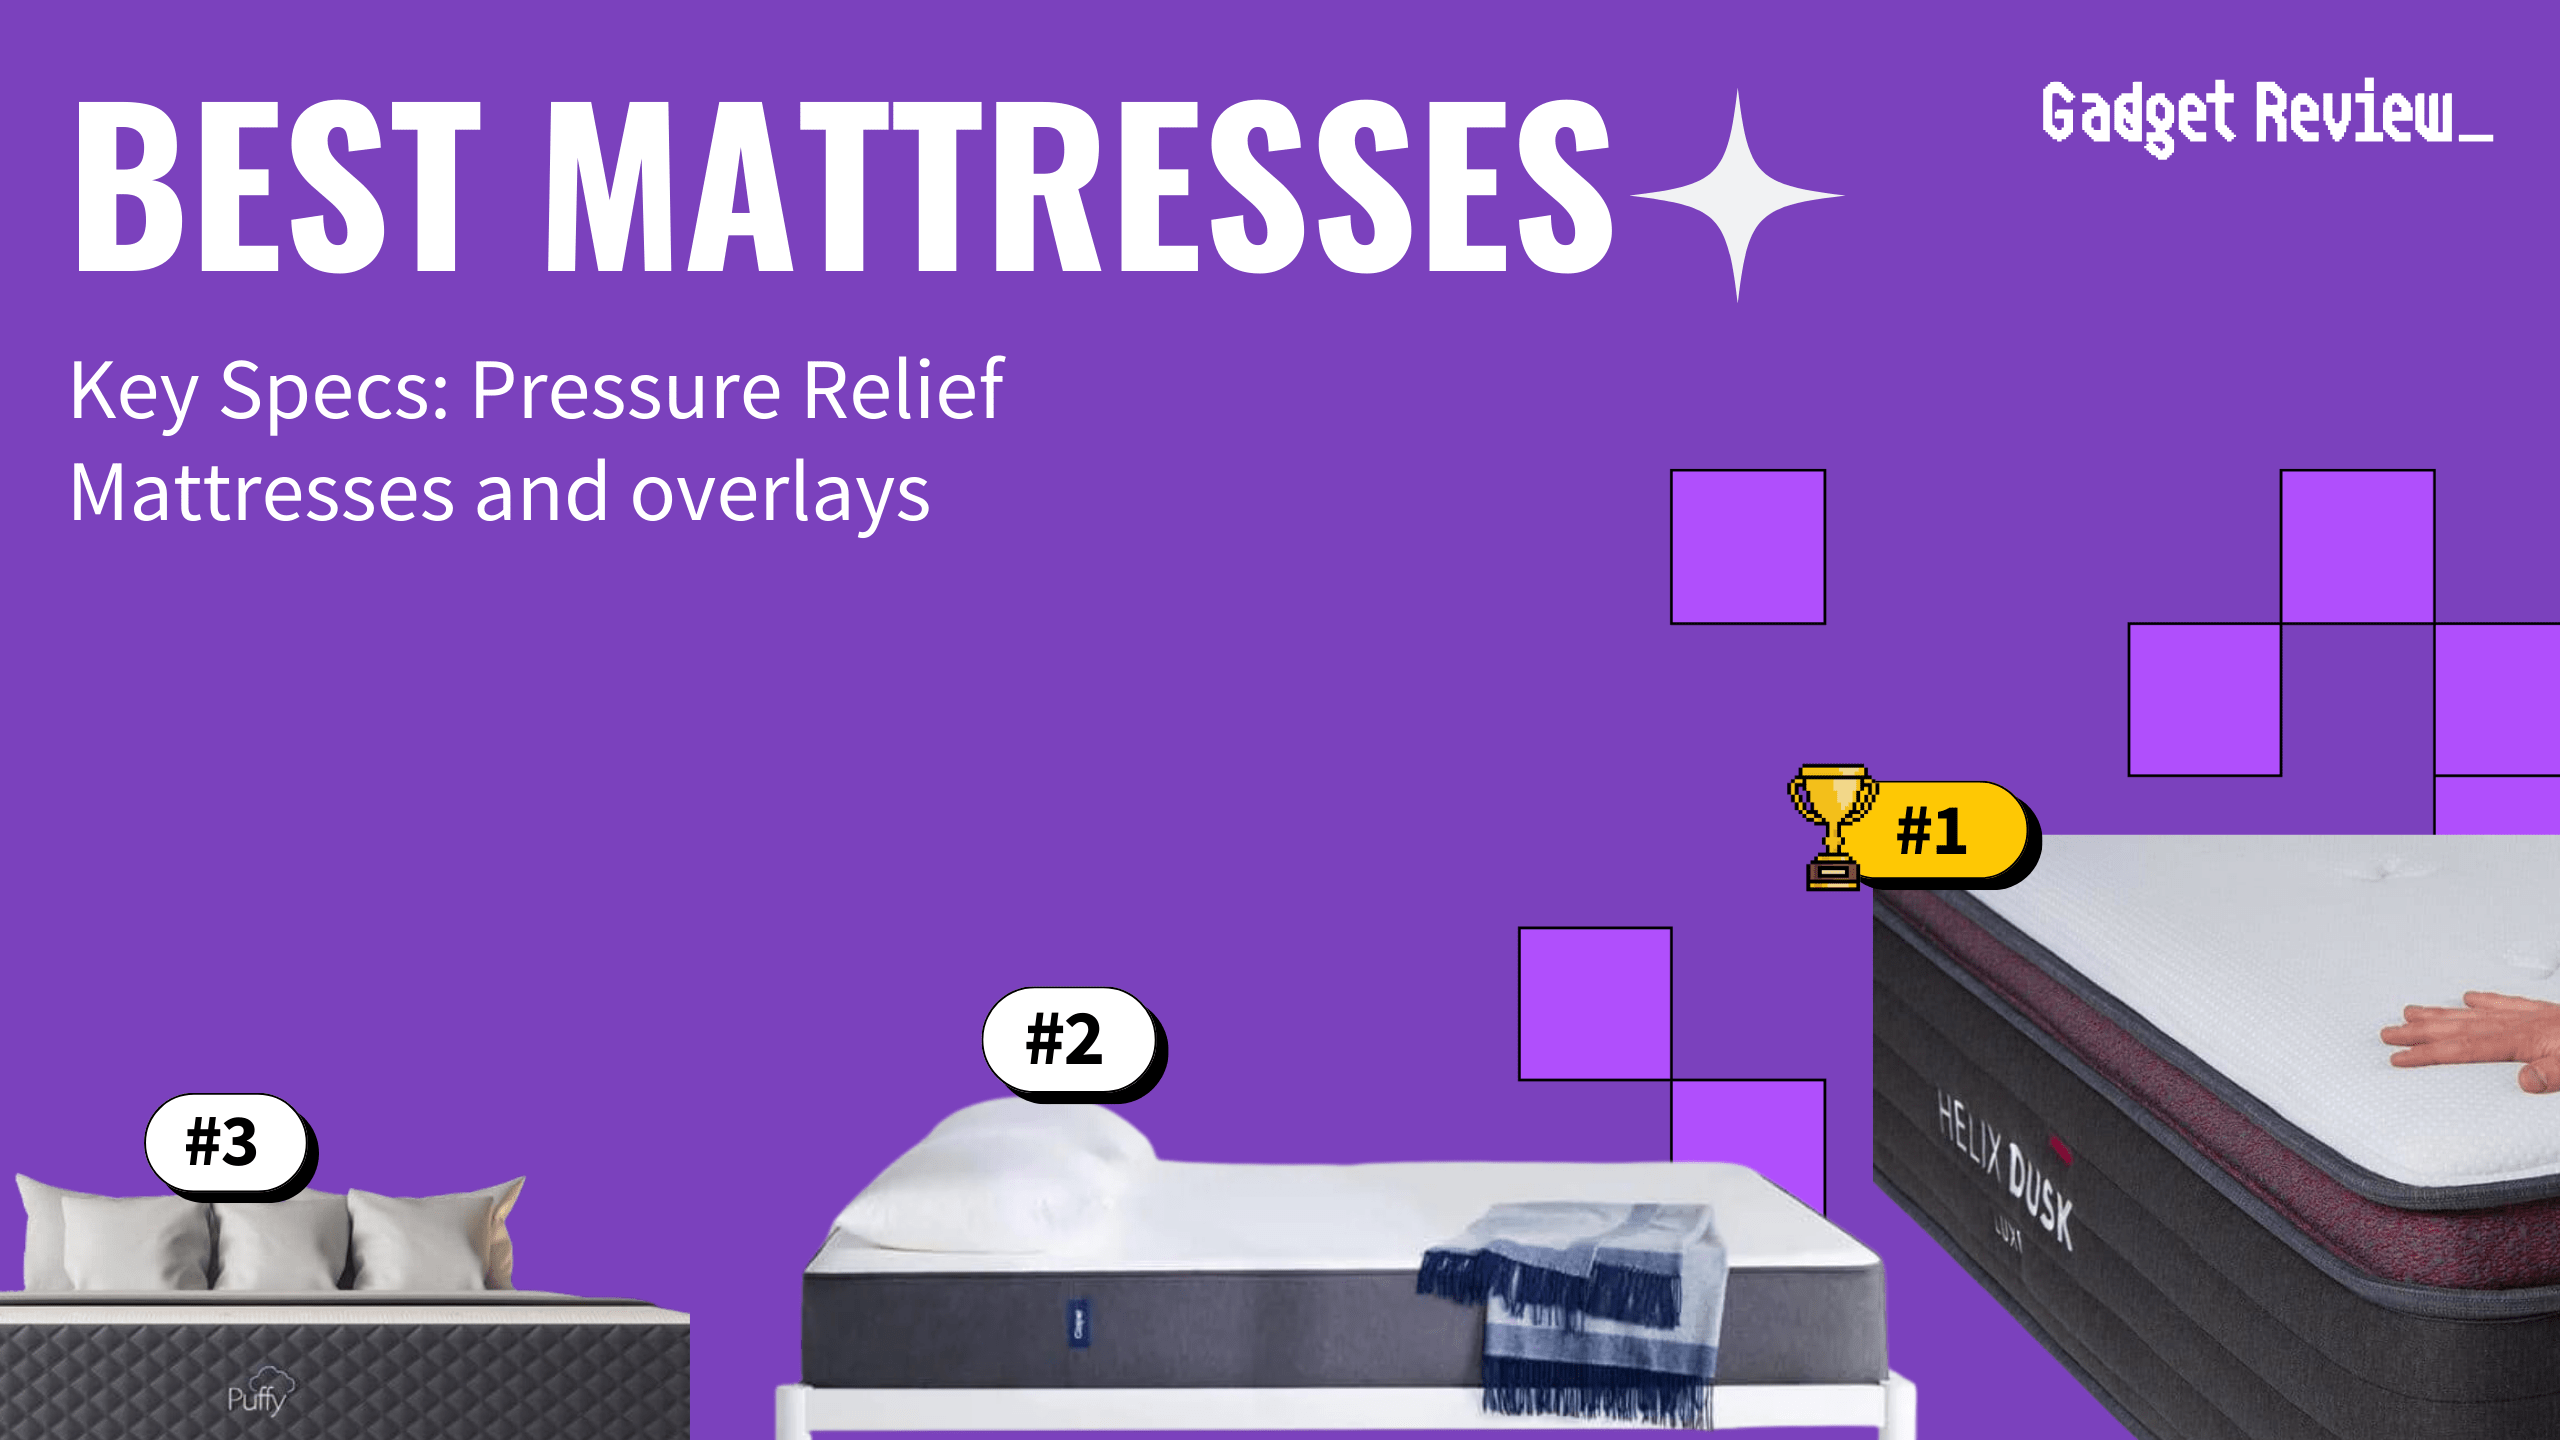 best mattresses featured image that shows the top three best mattresse models